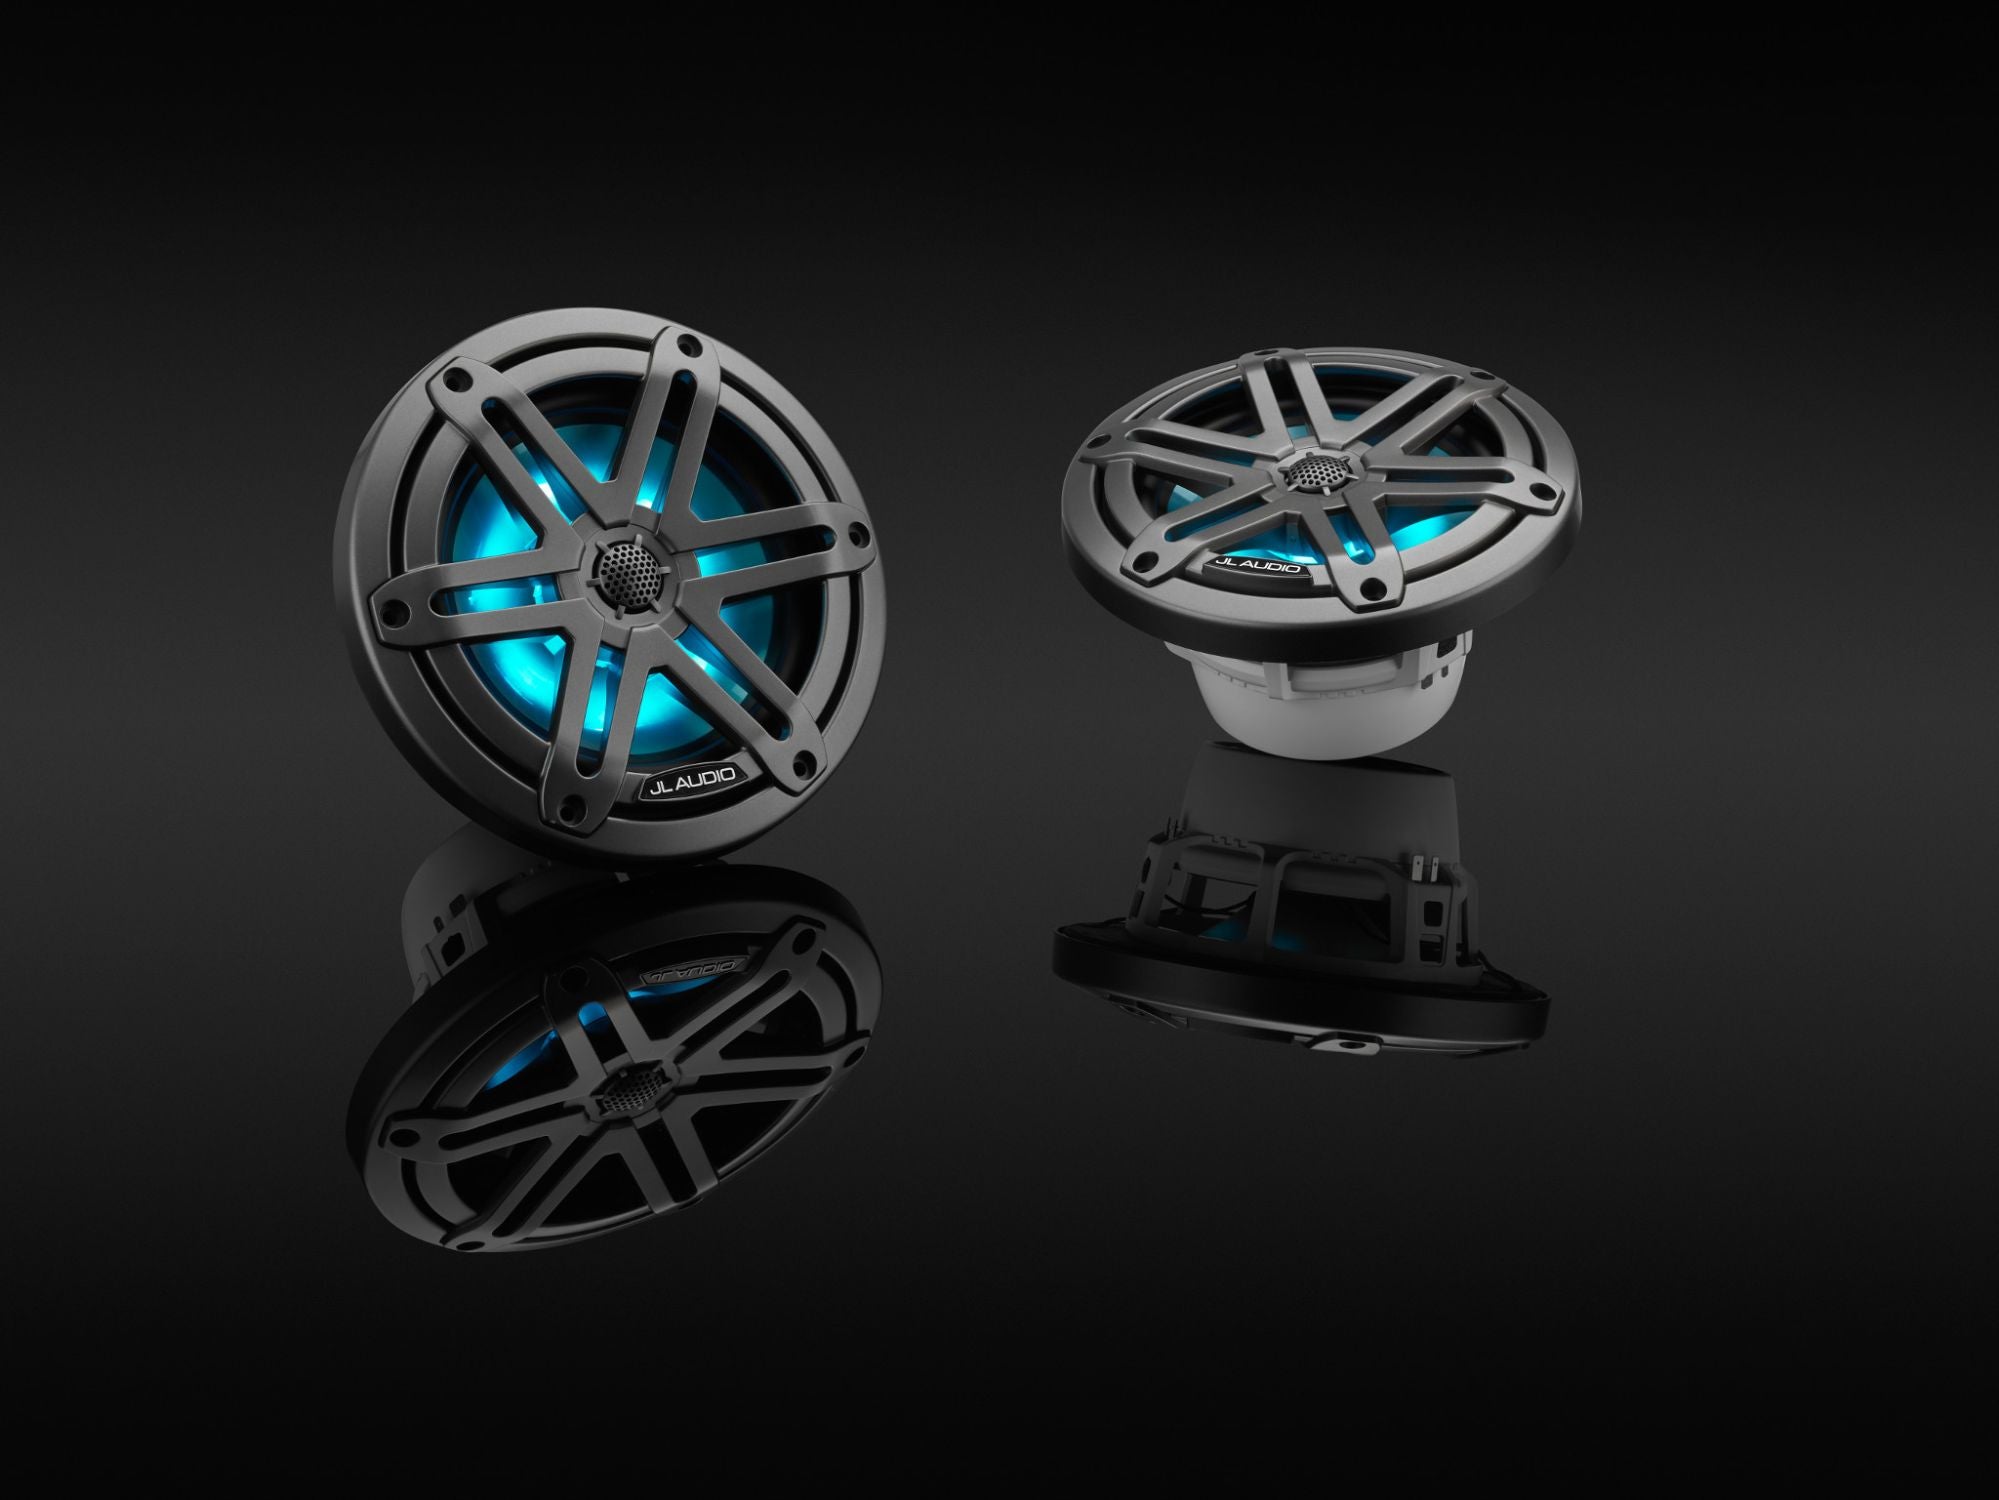 Pair of M3-650X-S-Gm-i Coaxial Speaker on Black, Lit Blue